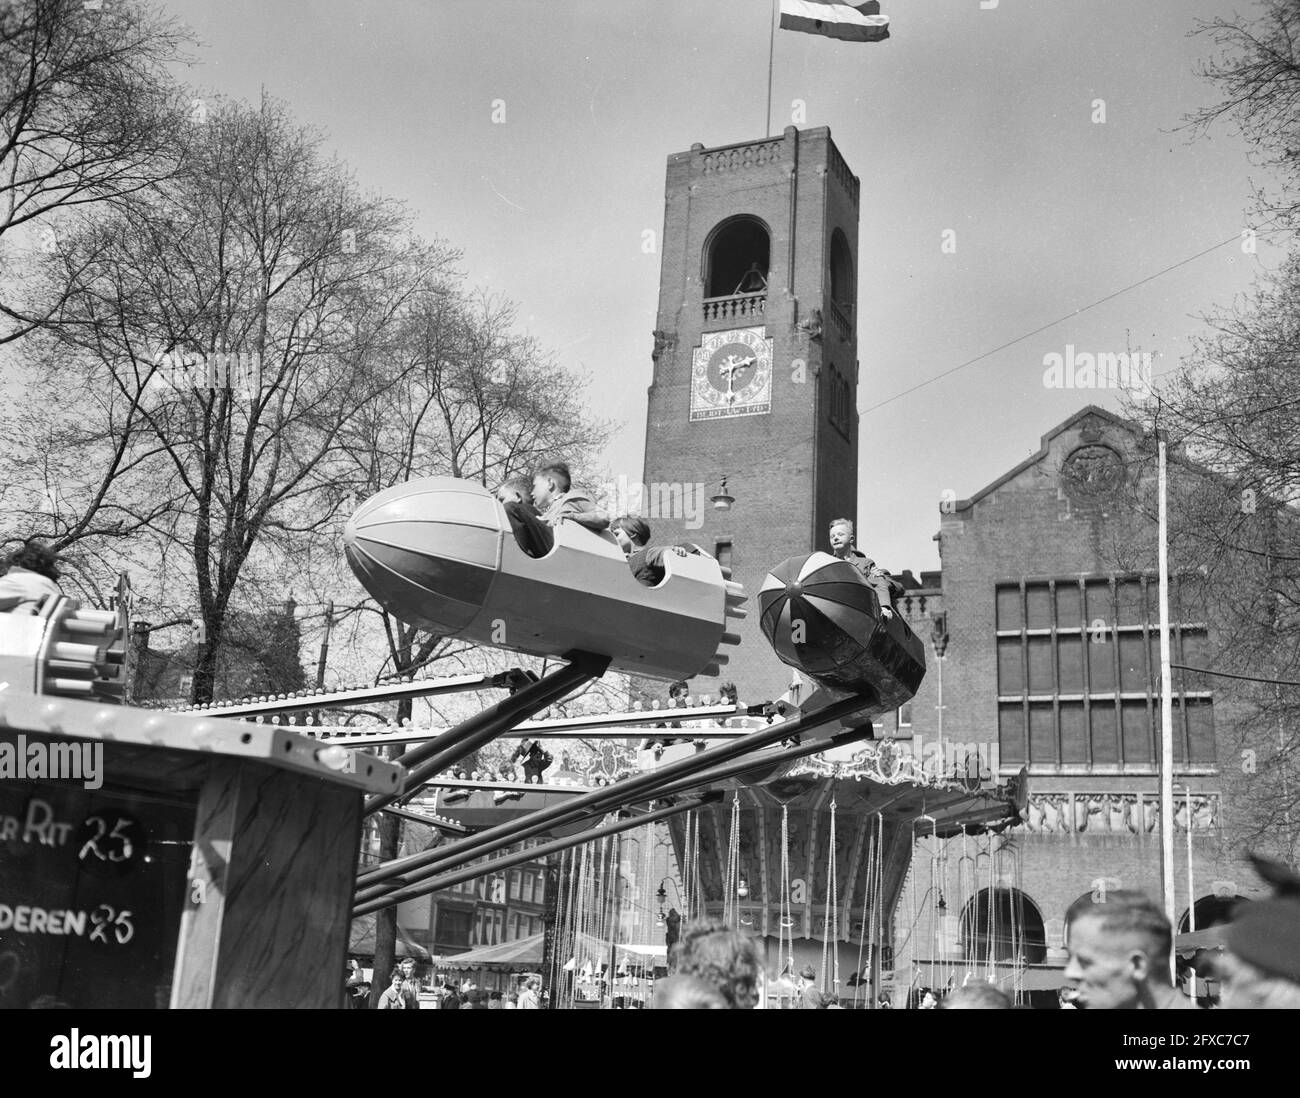 National holiday; fair on the Beursplein in Amsterdam, May 5, 1956, fair buildings, fairgrounds, The Netherlands, 20th century press agency photo, news to remember, documentary, historic photography 1945-1990, visual stories, human history of the Twentieth Century, capturing moments in time Stock Photo